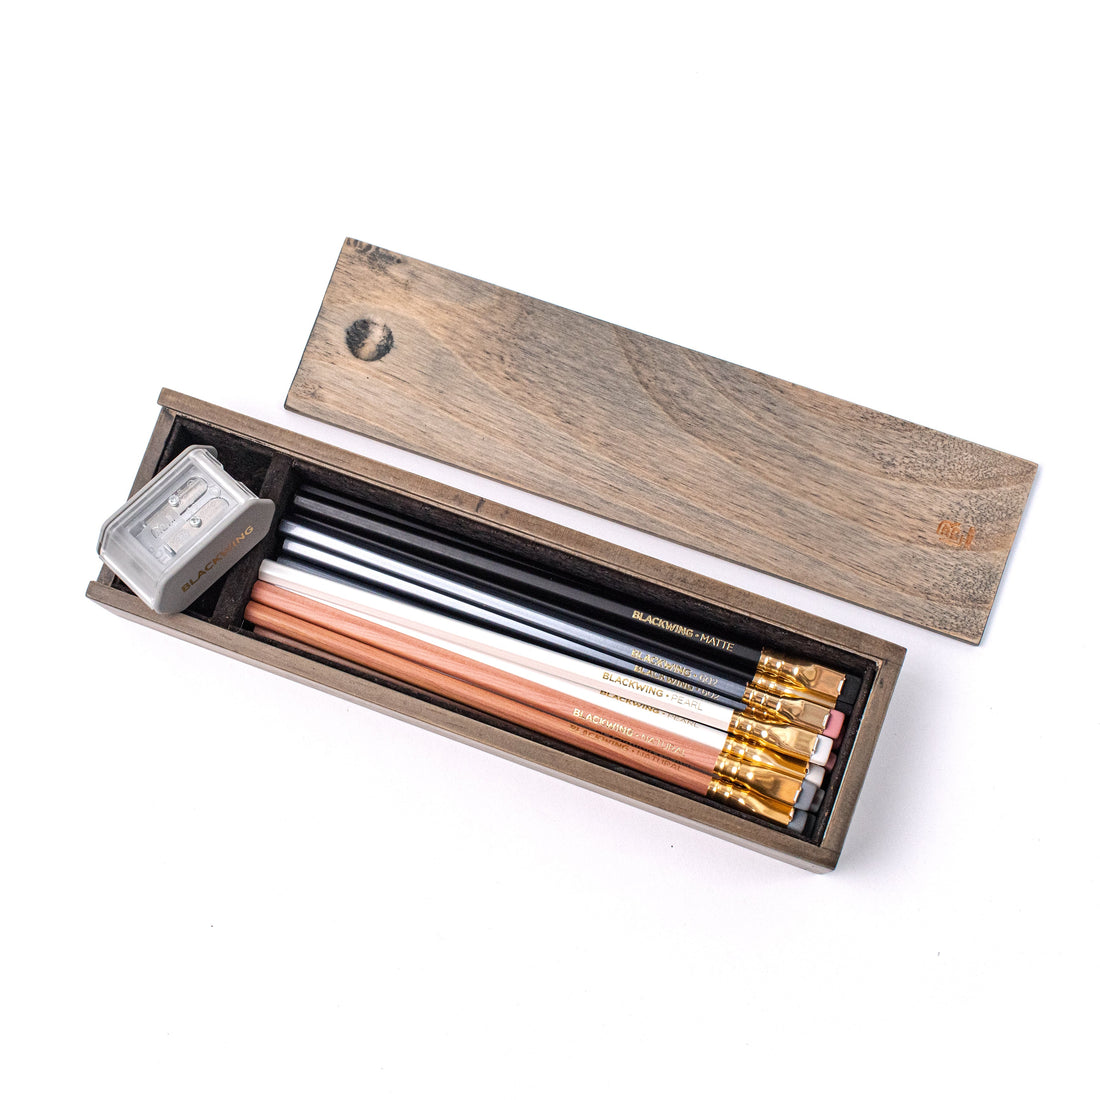 A set of Blackwing Rustic Boxed Set- Mixed pencils with a Two-Step Long Point Sharpener inside a Blackwing Rustic Box Set.